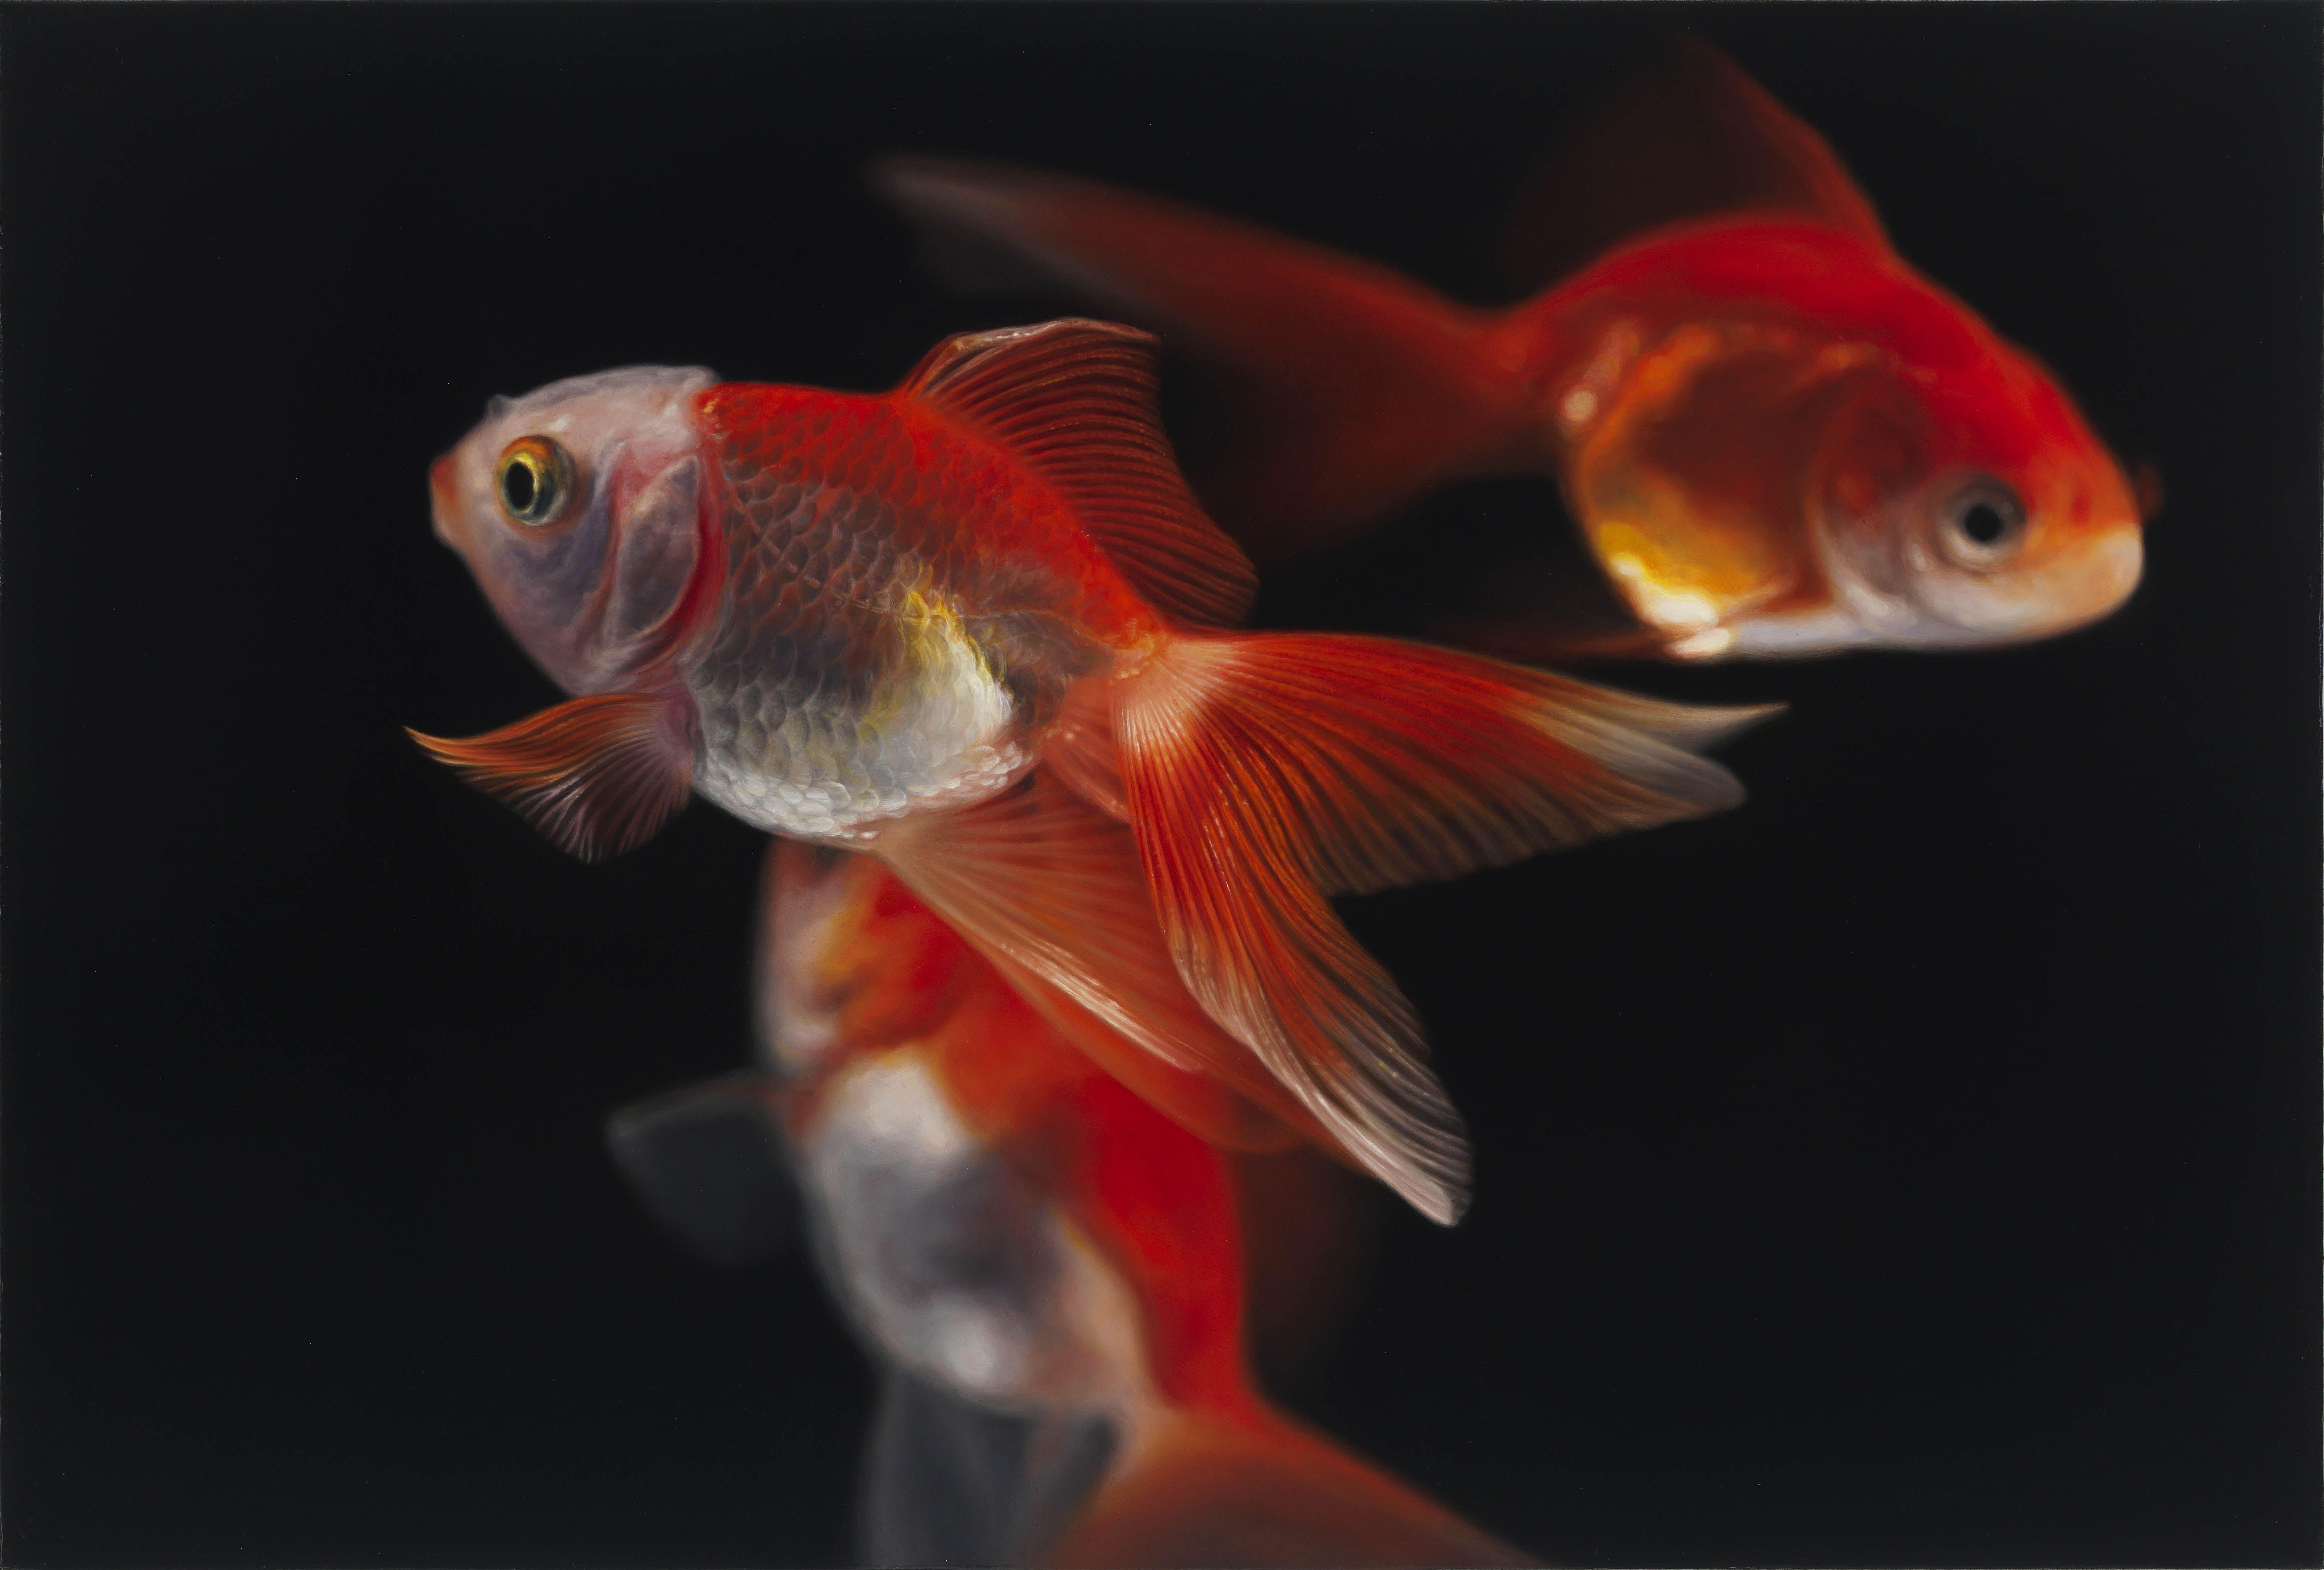 Goldfish is a nostalgic and sentimental subject. For most people, it would be their very first pet of their childhood. A calm and elegantly swimming goldfish looks like it is in another world, free of care and always at peace. It is illuminating to